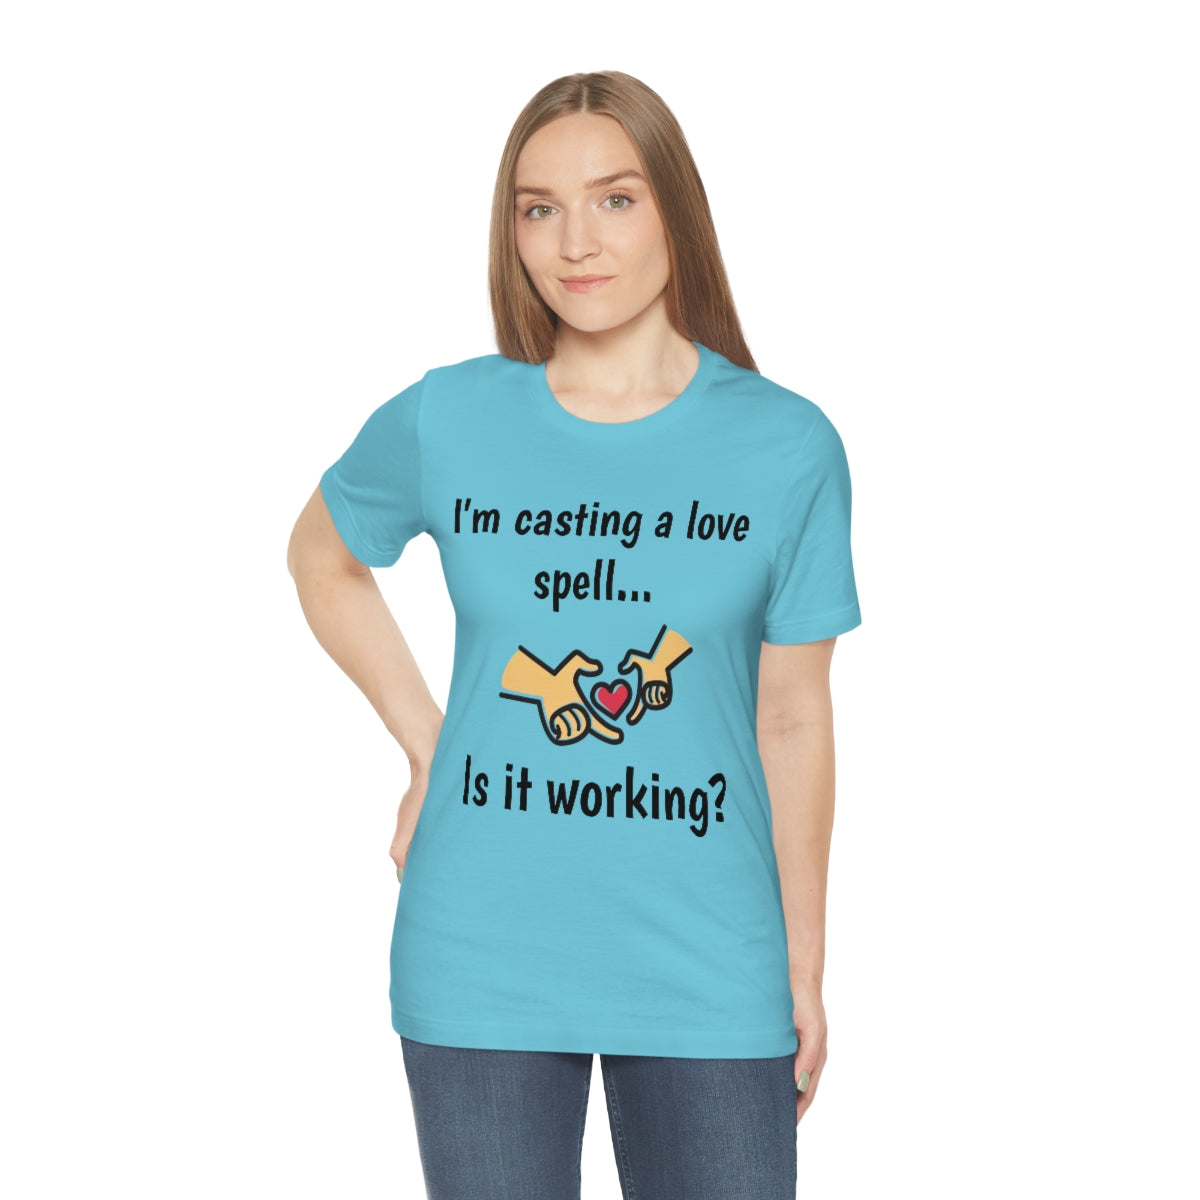 I'm casting a love spell, is it working? - Funny Short Sleeve Tee - CrazyTomTShirts